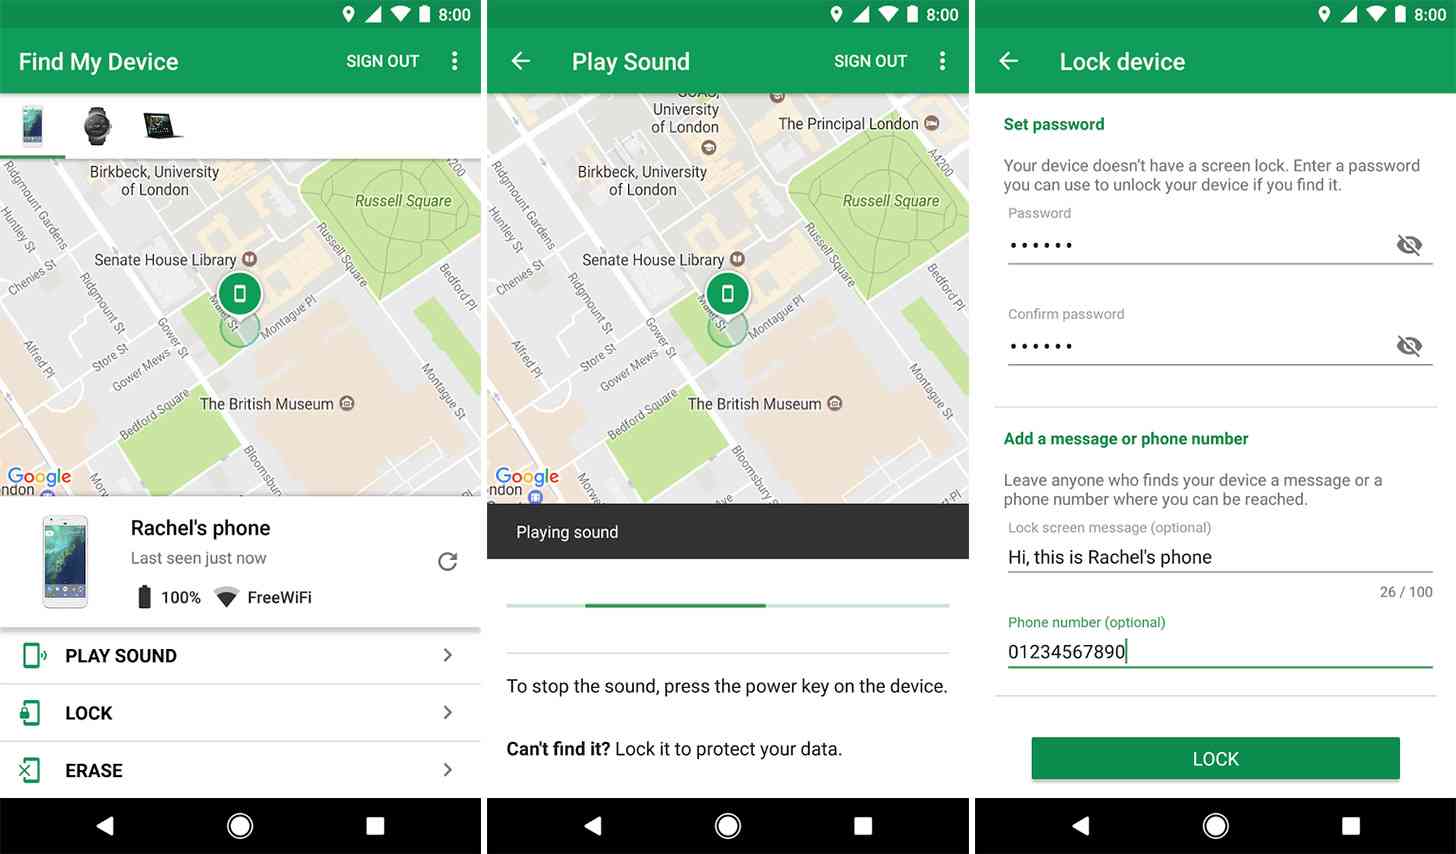 Google Find My Device Android app screenshots